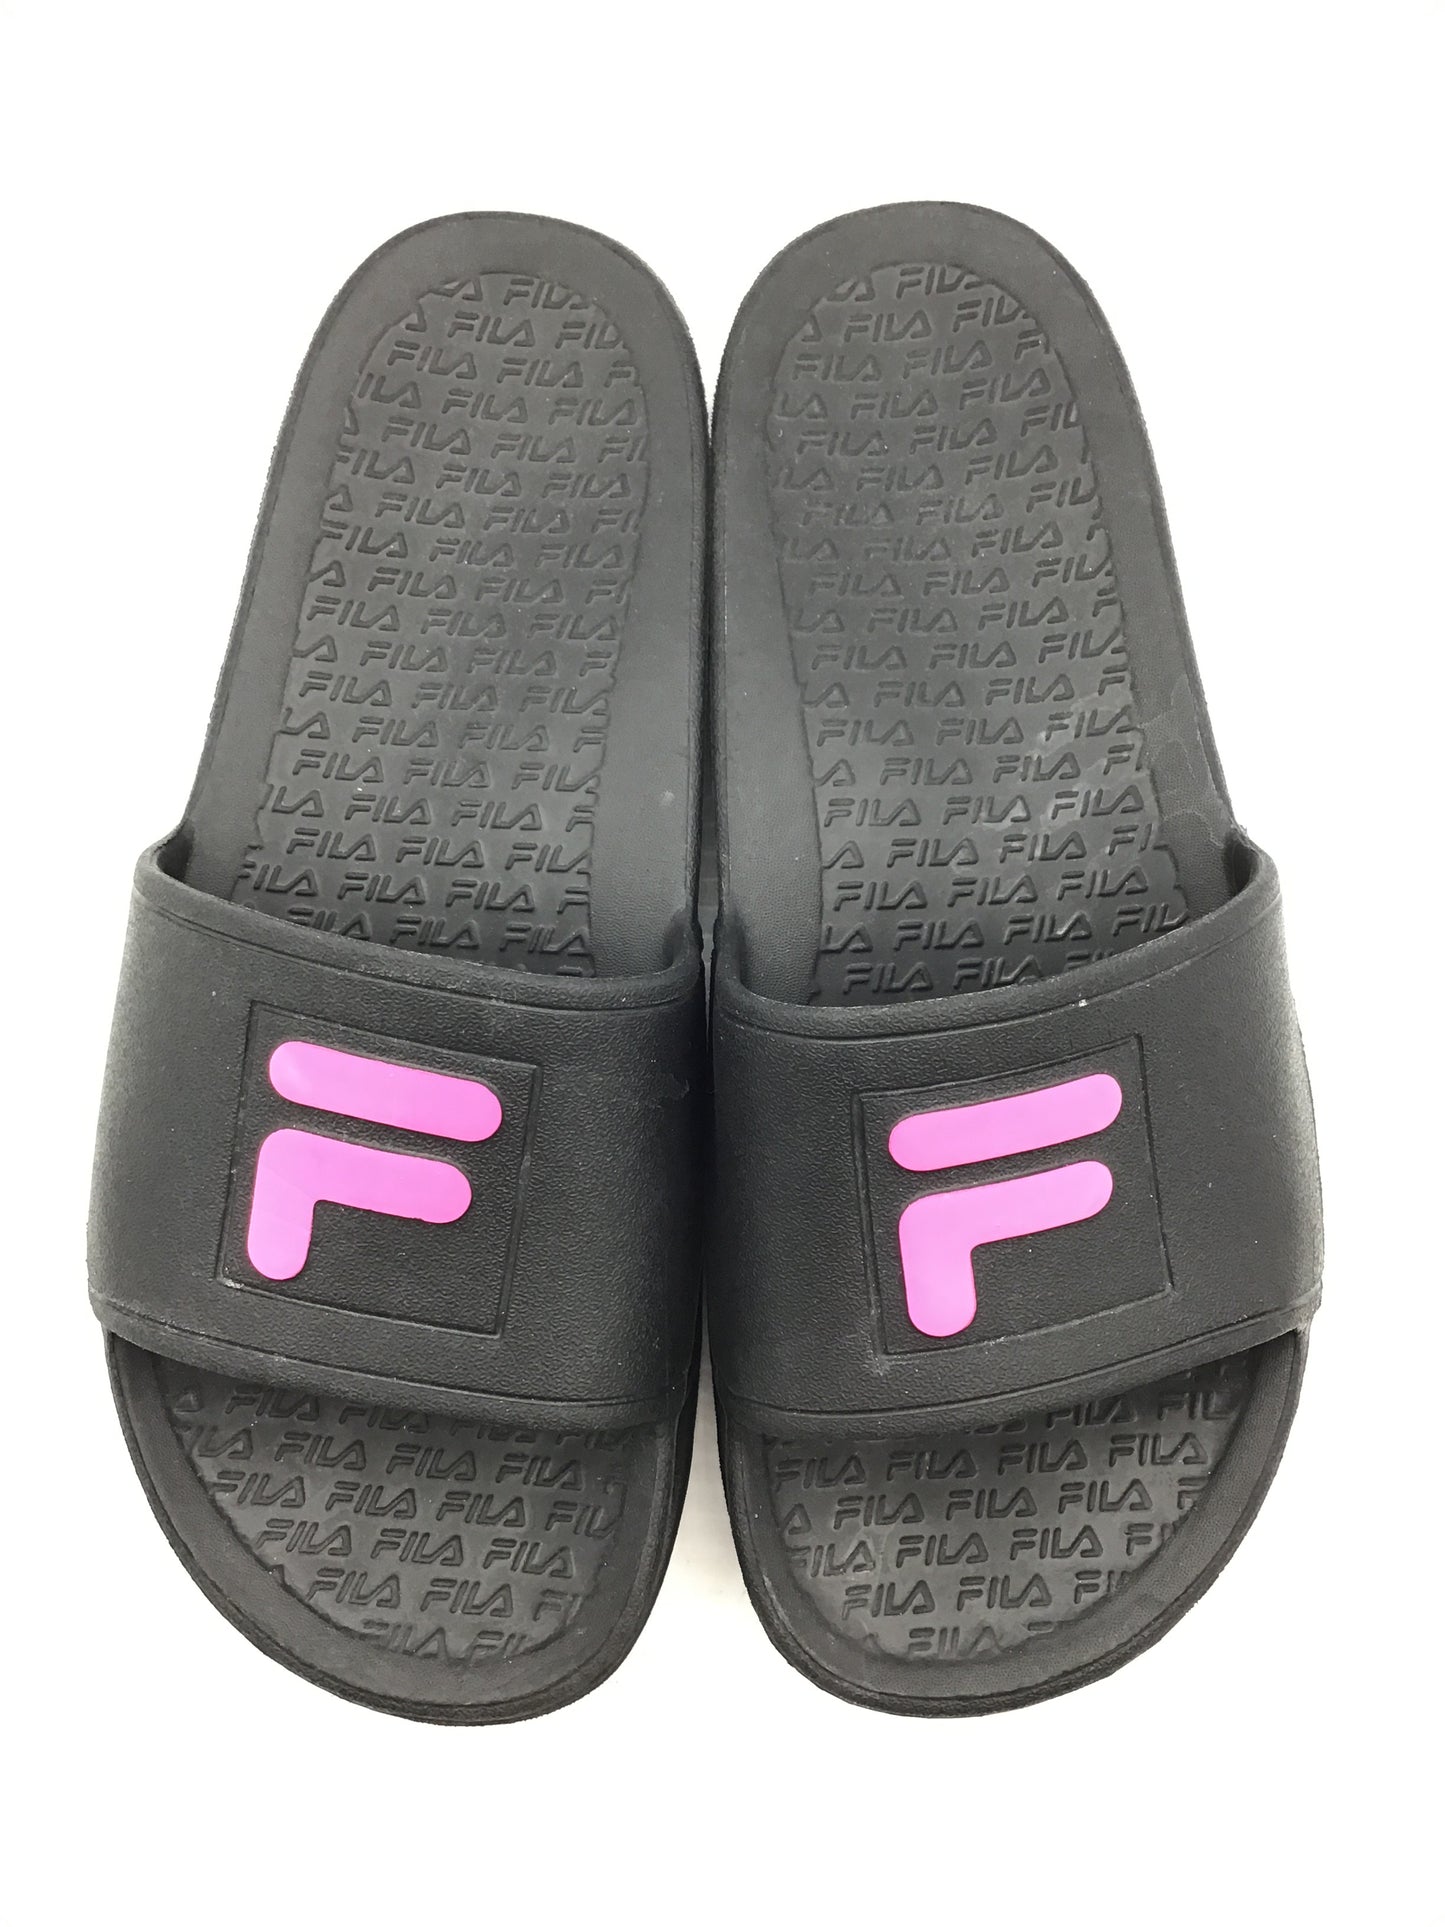 Sandals Flats By Fila  Size: 10